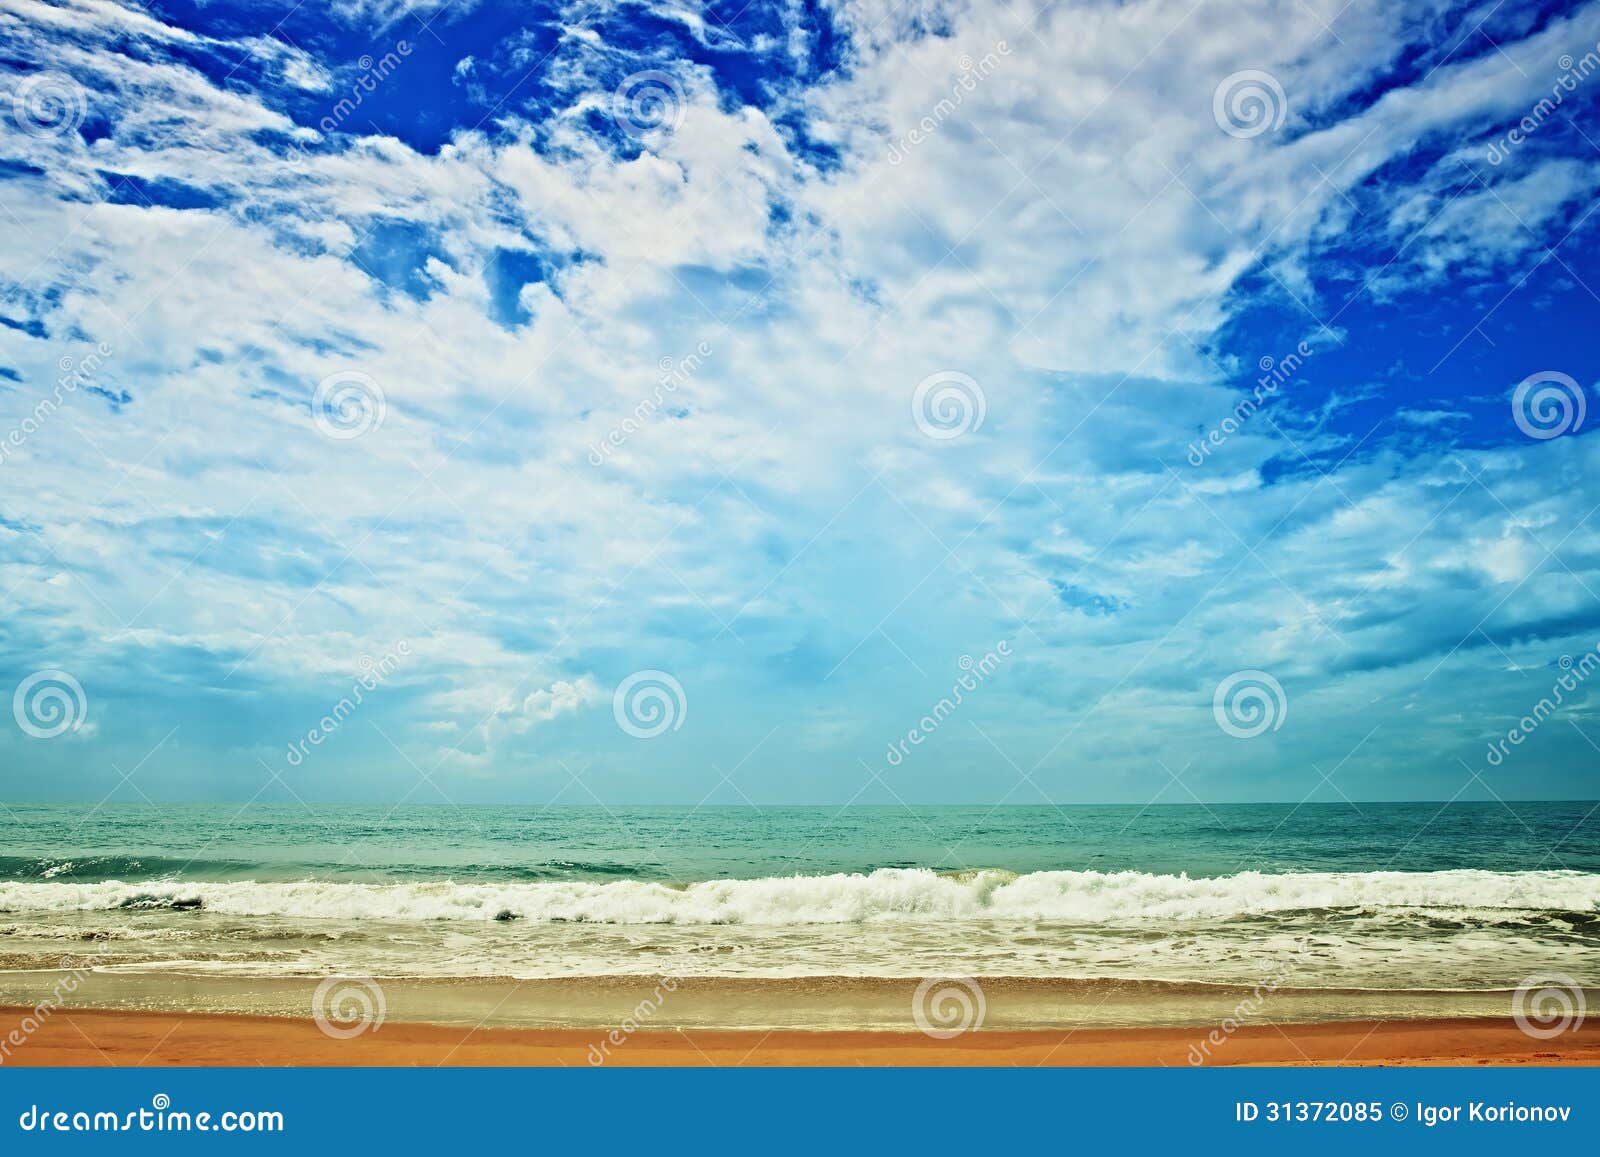 Sand Beach Ocean And Cloudy Sky Stock Image Image Of Coast Outdoors